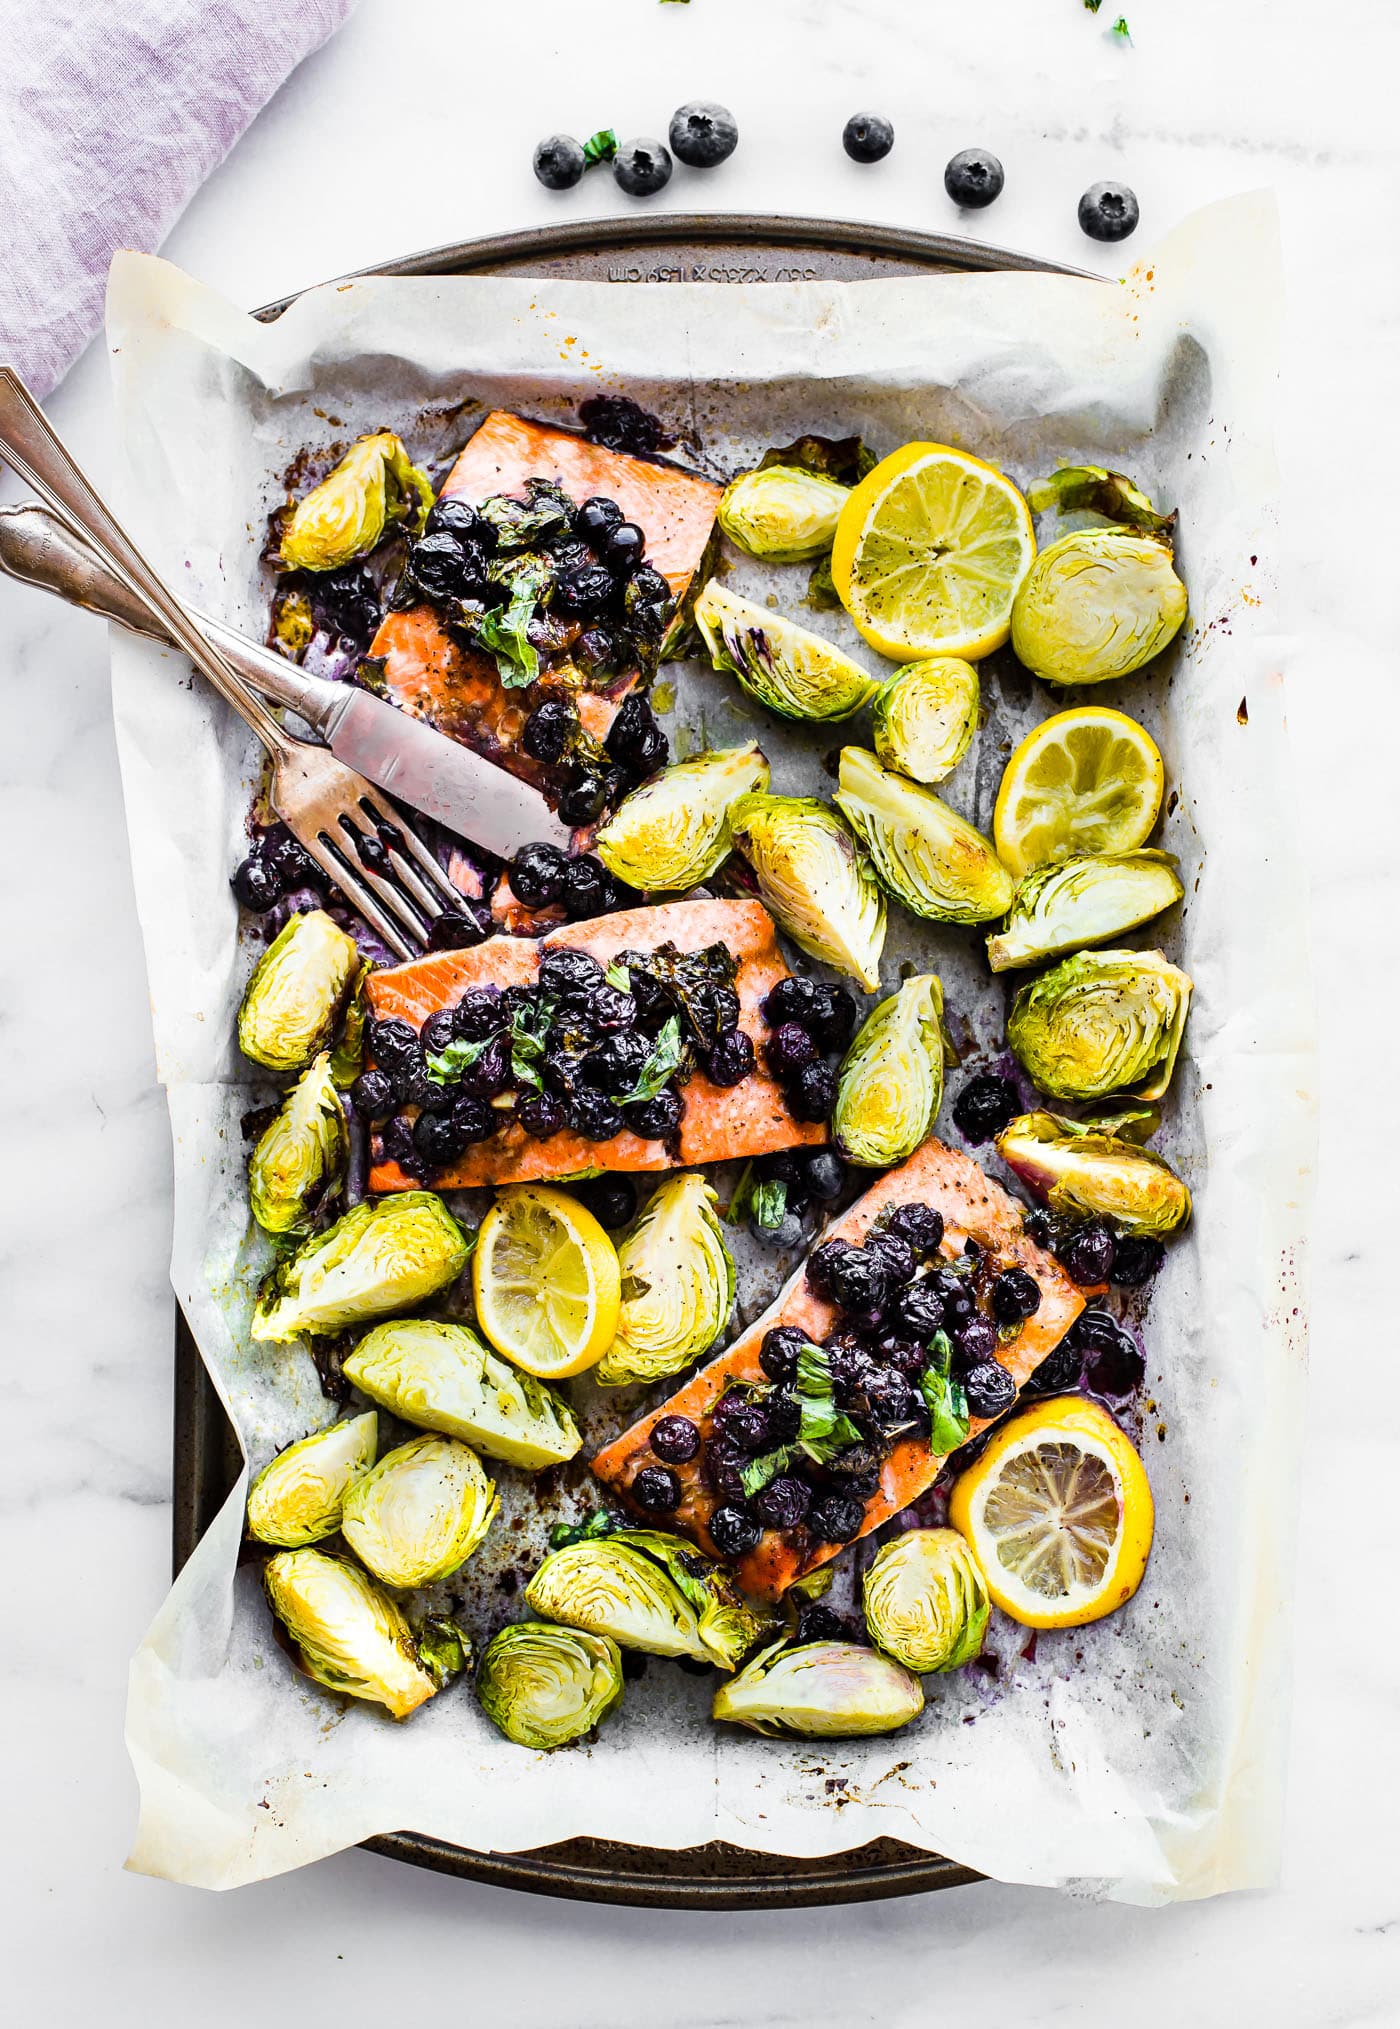 One pan Paleo SUPERFOOD Baked Salmon! This baked salmon recipe is ready in 20 minutes and packed full of nutrients. A nourishing, whole 30 friendly, flavorful meal! Salmon baked with a zippy basil blueberry balsamic topping and crispy Brüssel sprouts! Get your sheet pan ready for dinner! www.cottercrunch.com